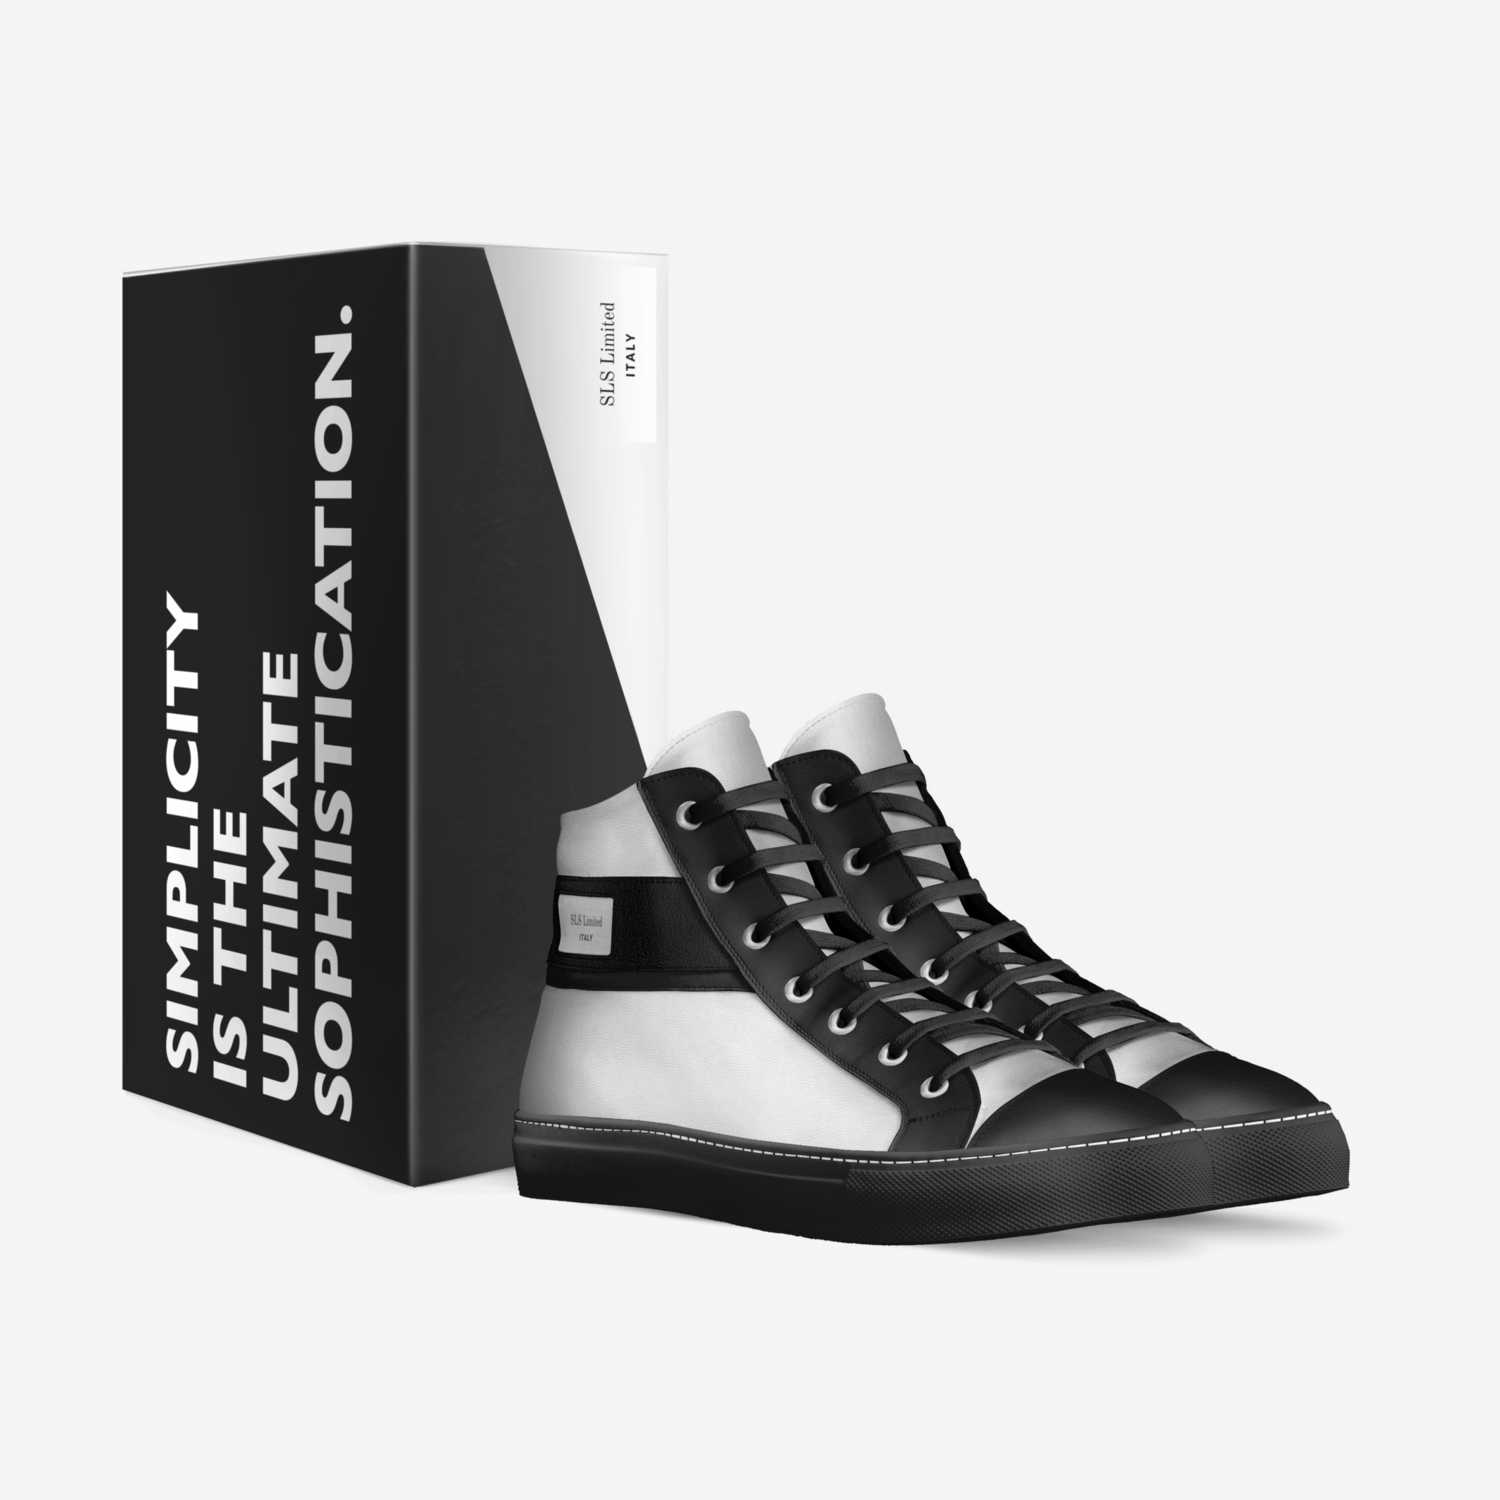 Tuxedo Hi-Top WHT custom made in Italy shoes by Stefan L. Smith | Box view